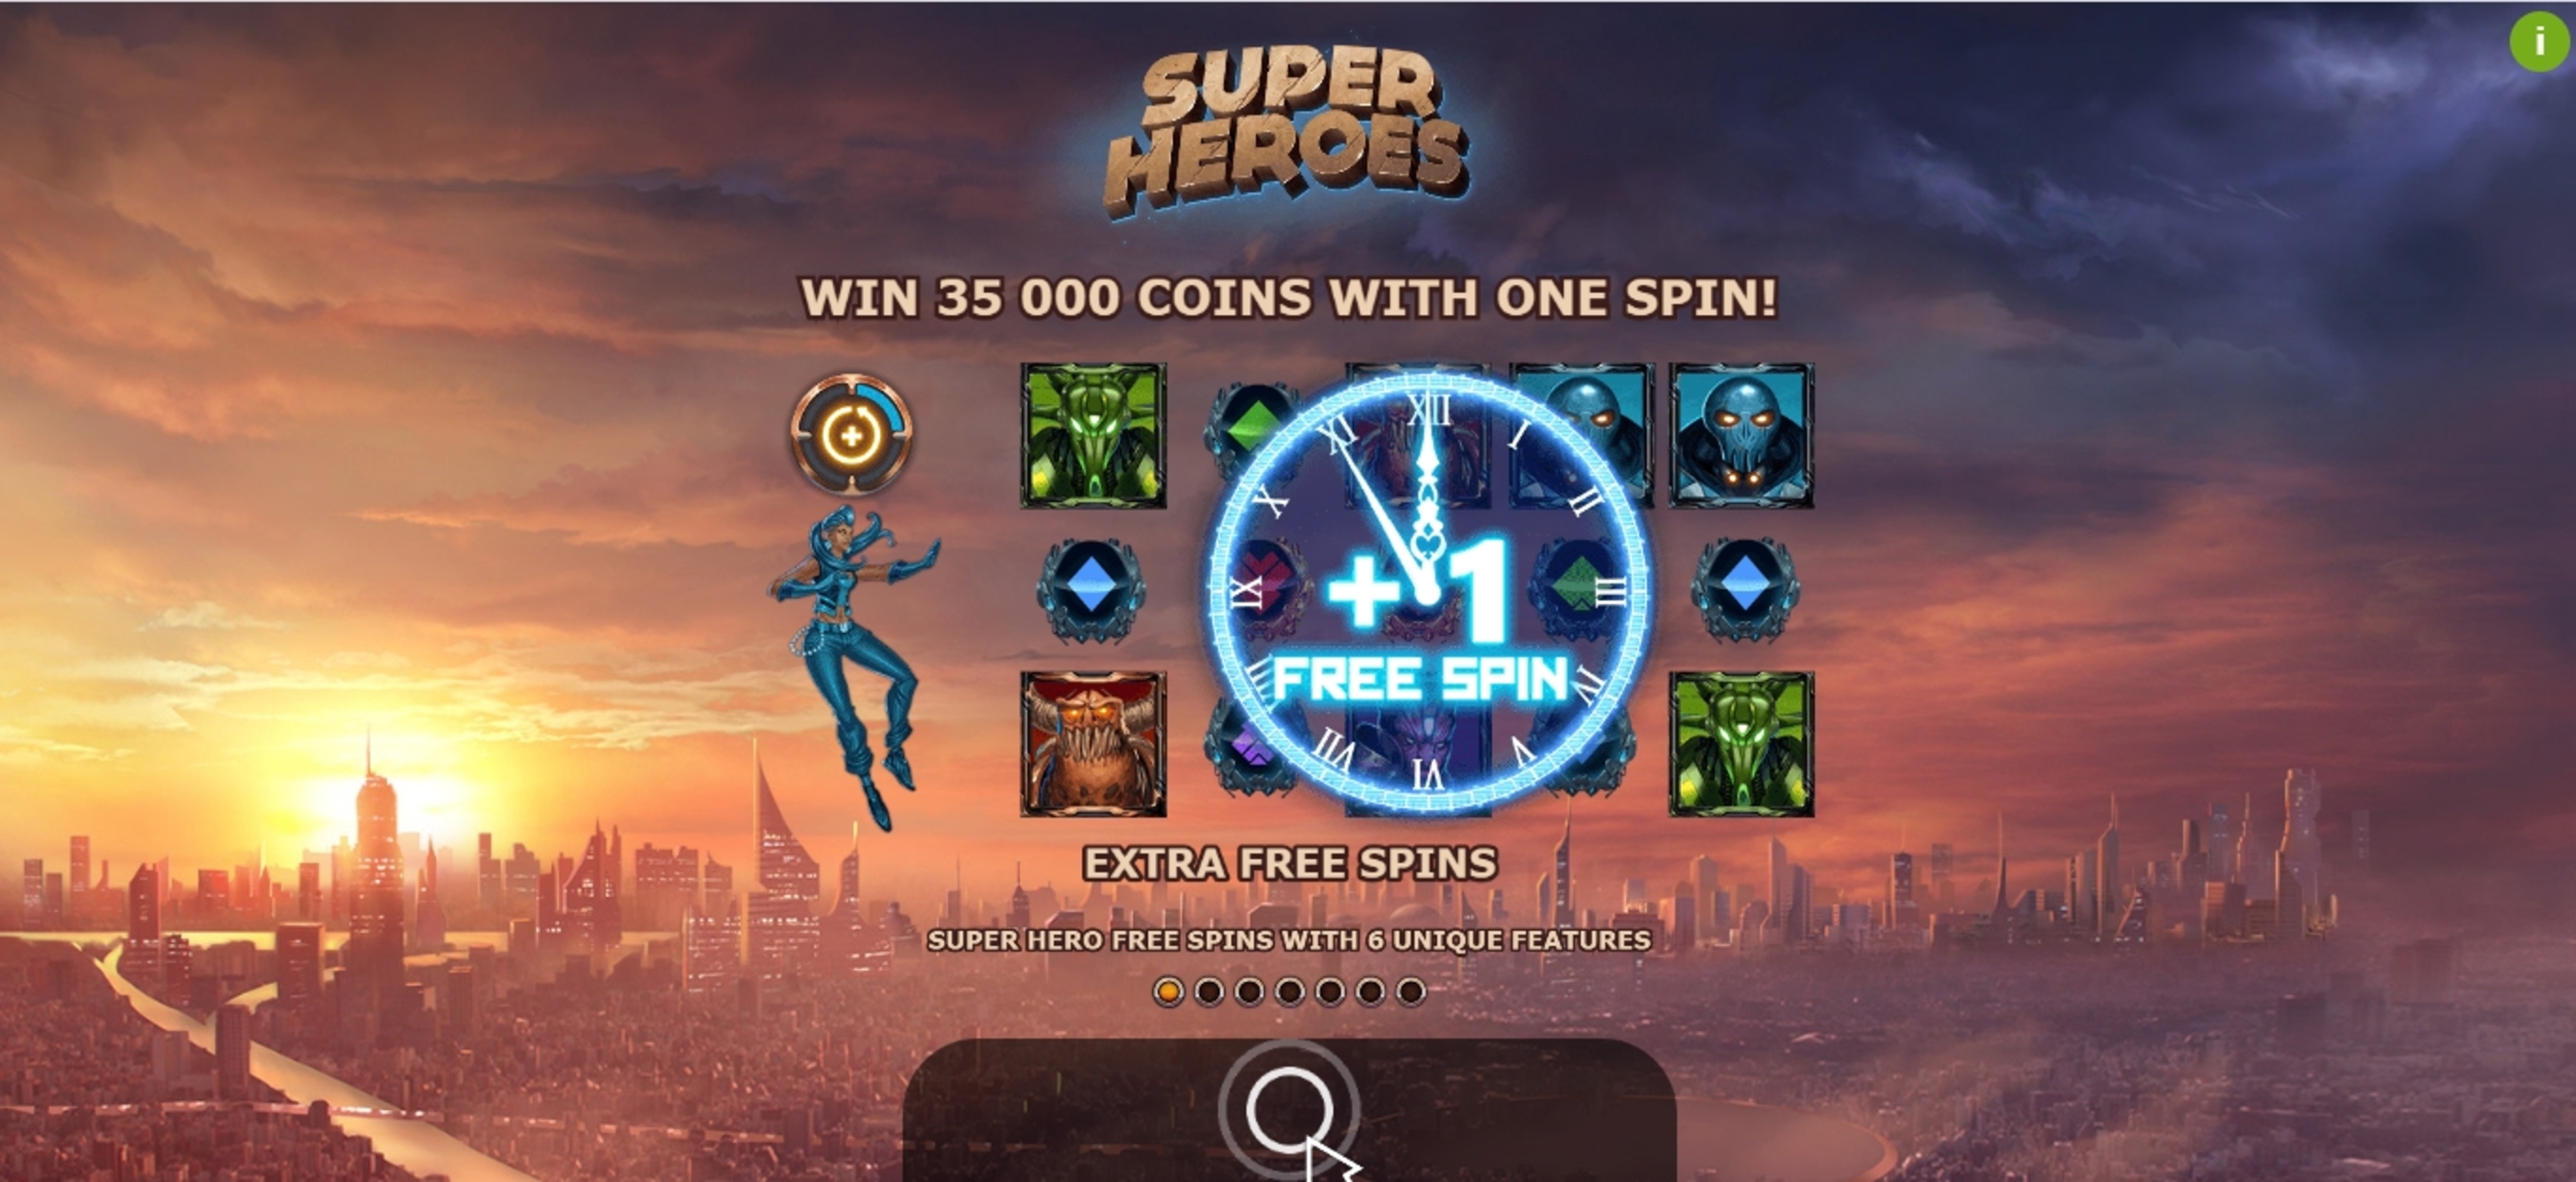 Play Super Heroes Free Casino Slot Game by Yggdrasil Gaming